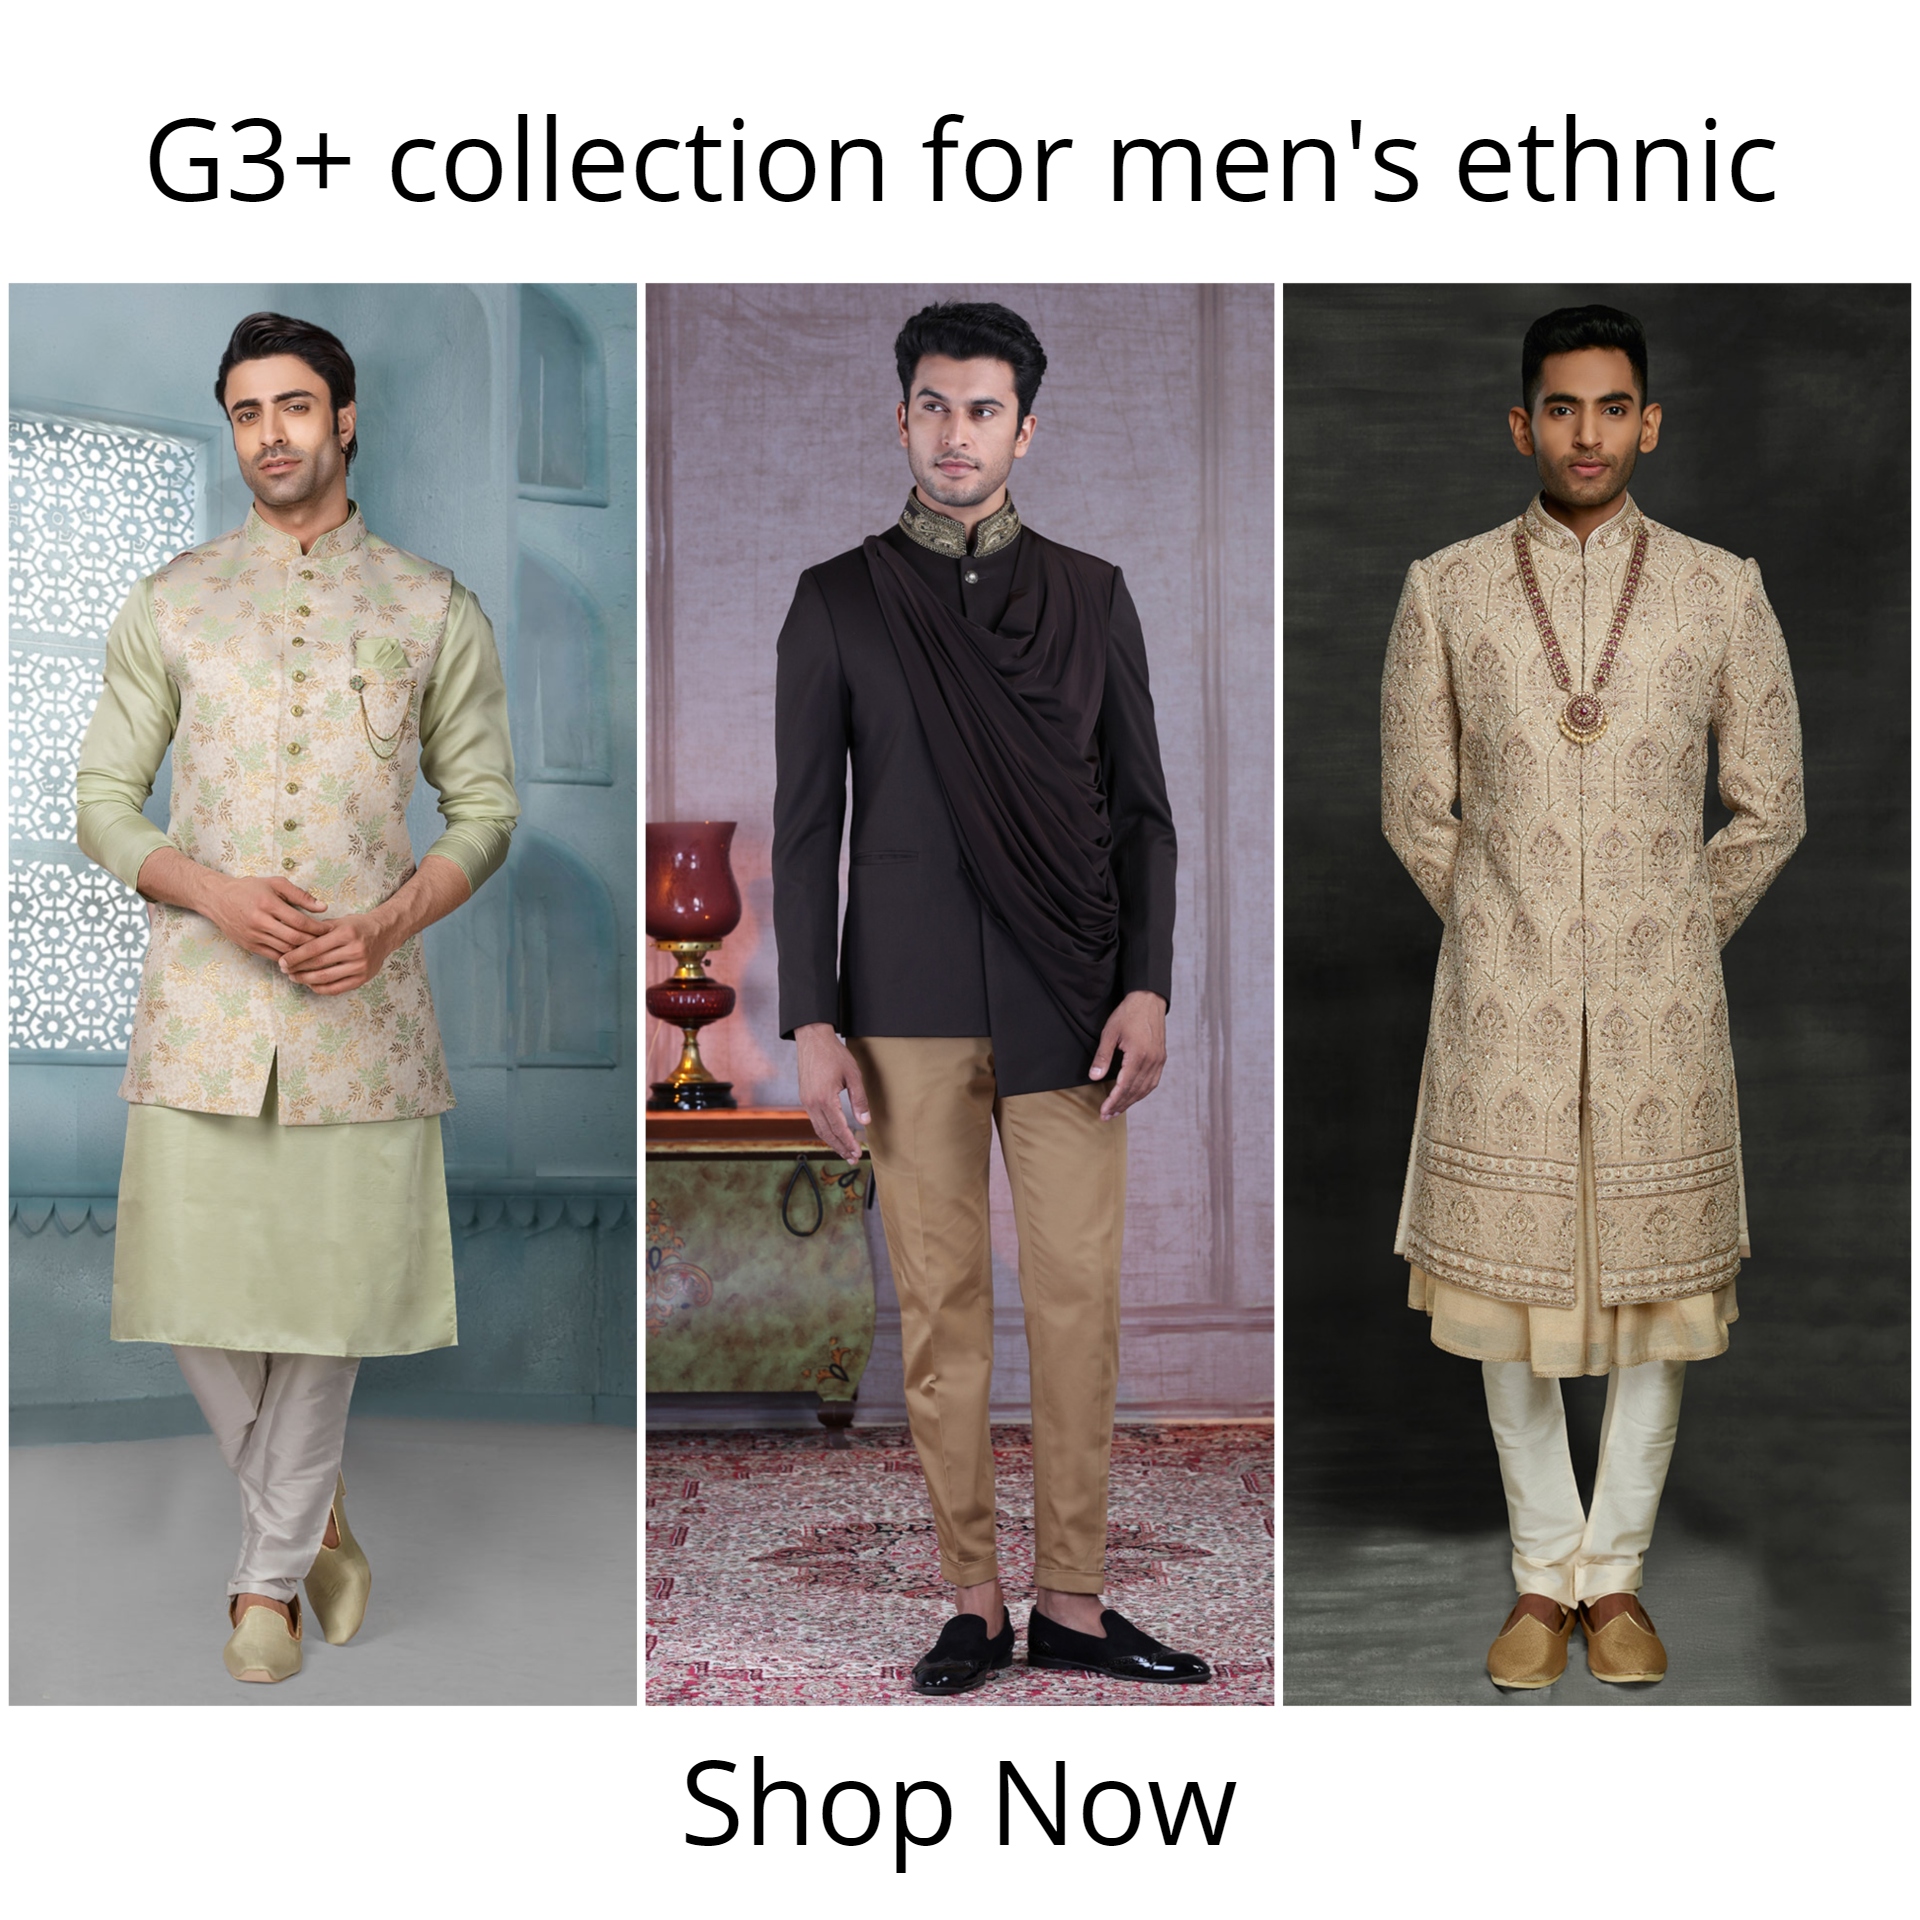 G3+ men's wedding outfit collection